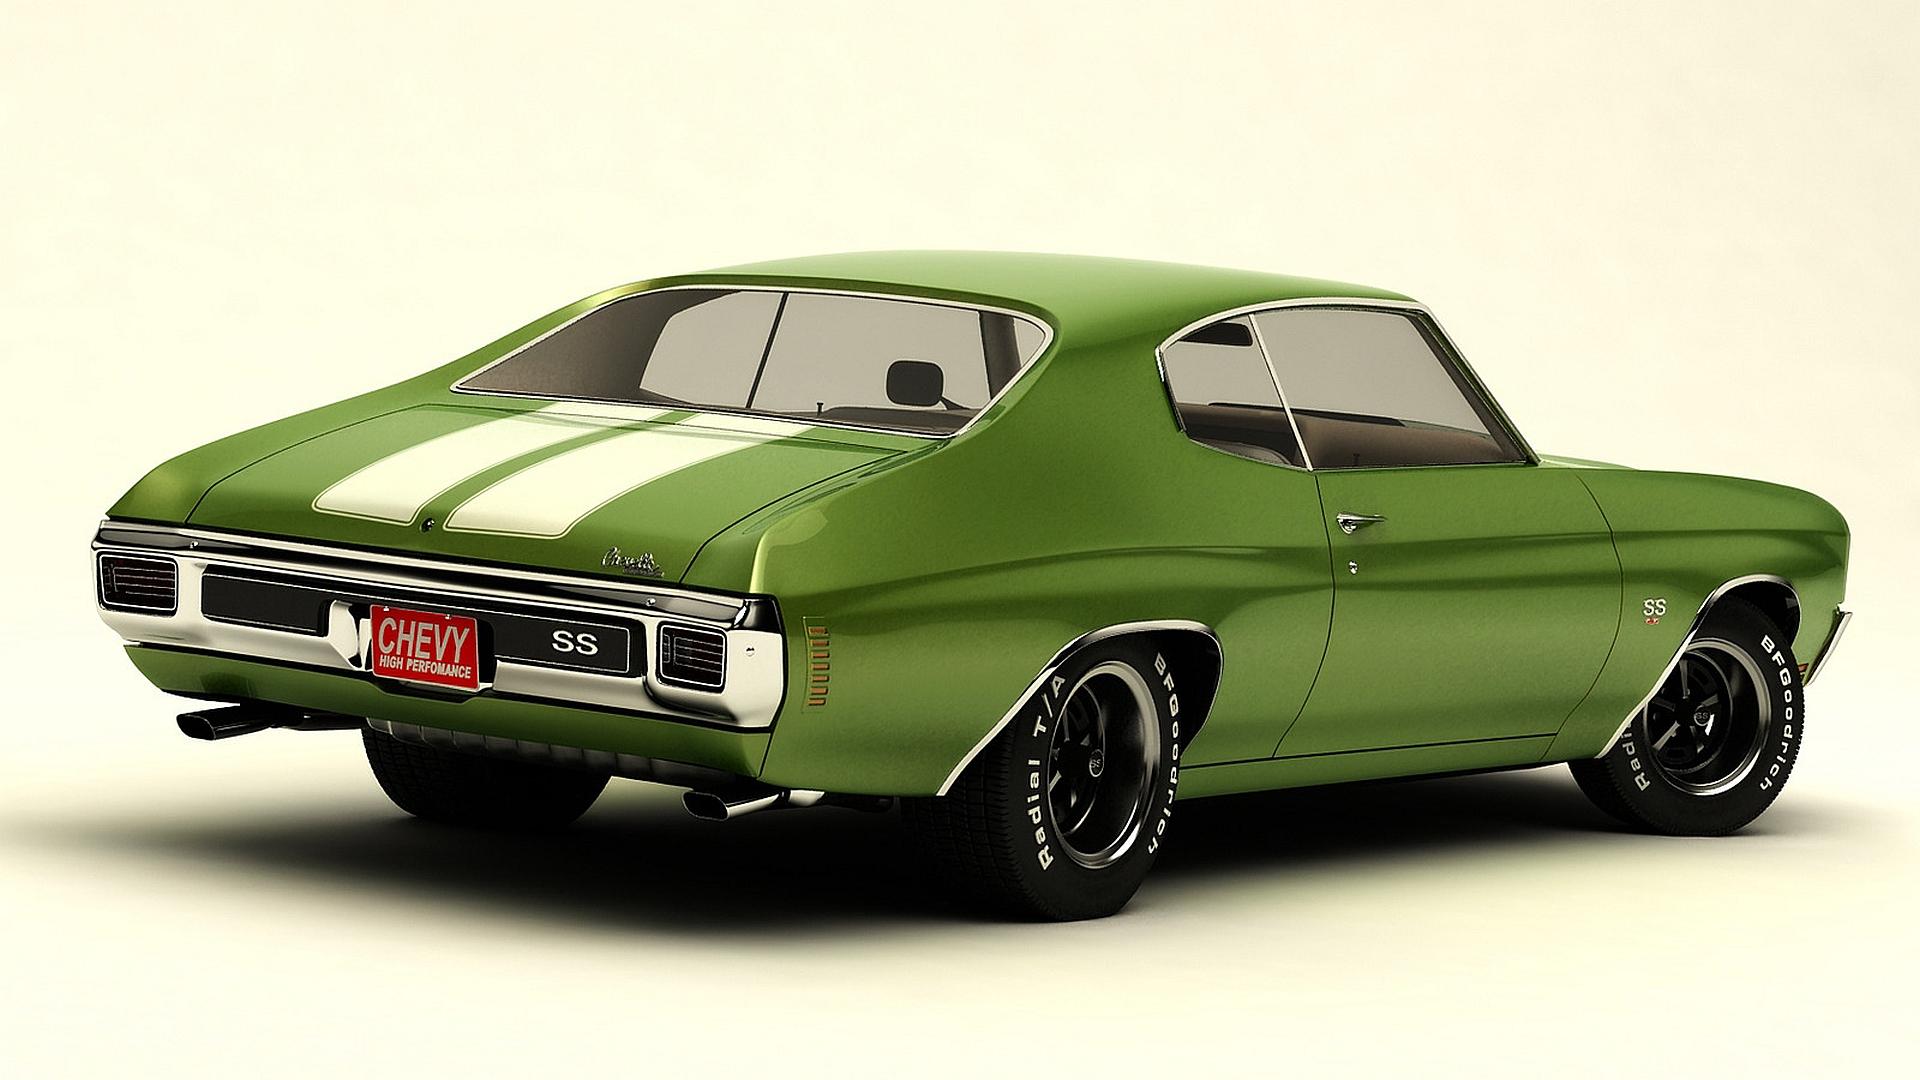 Chevrolet Chevelle Wallpapers HD Download